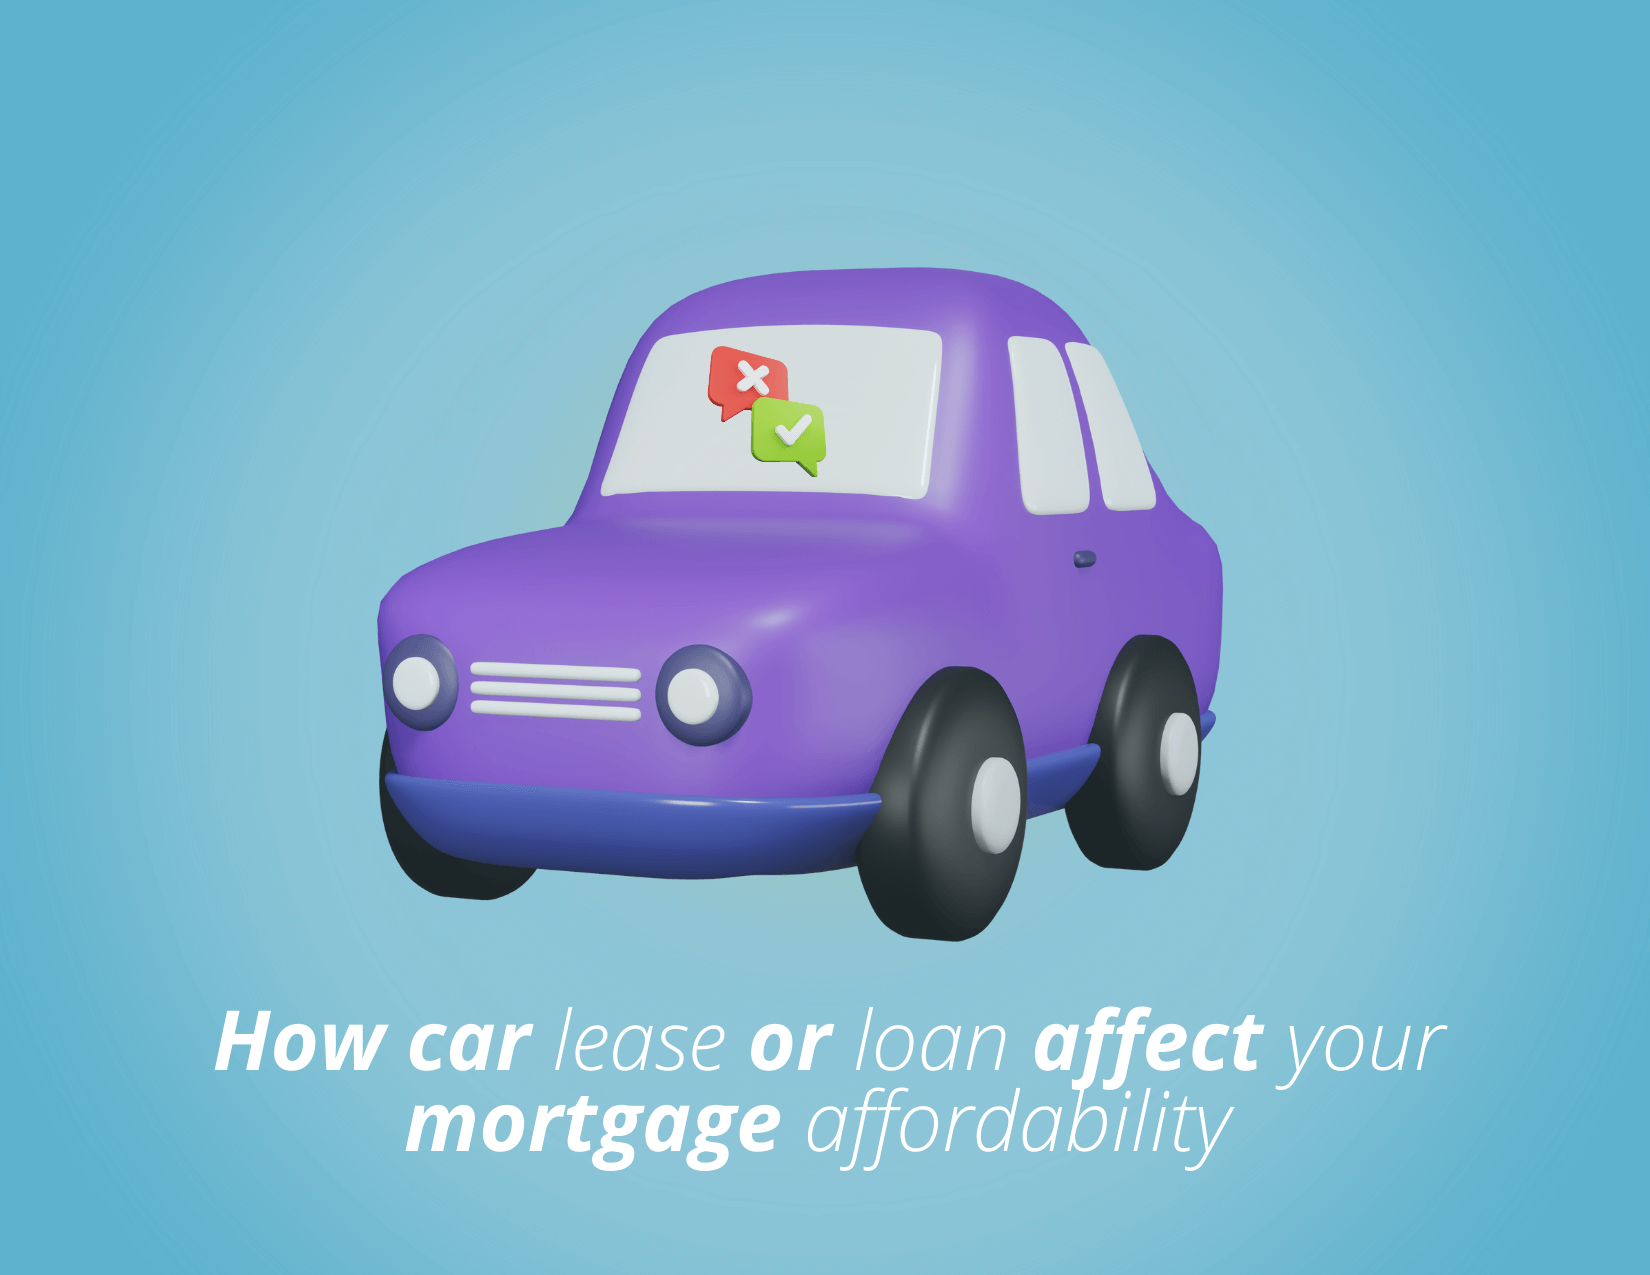 Leasing a Car in Canada - How does it impact mortgage